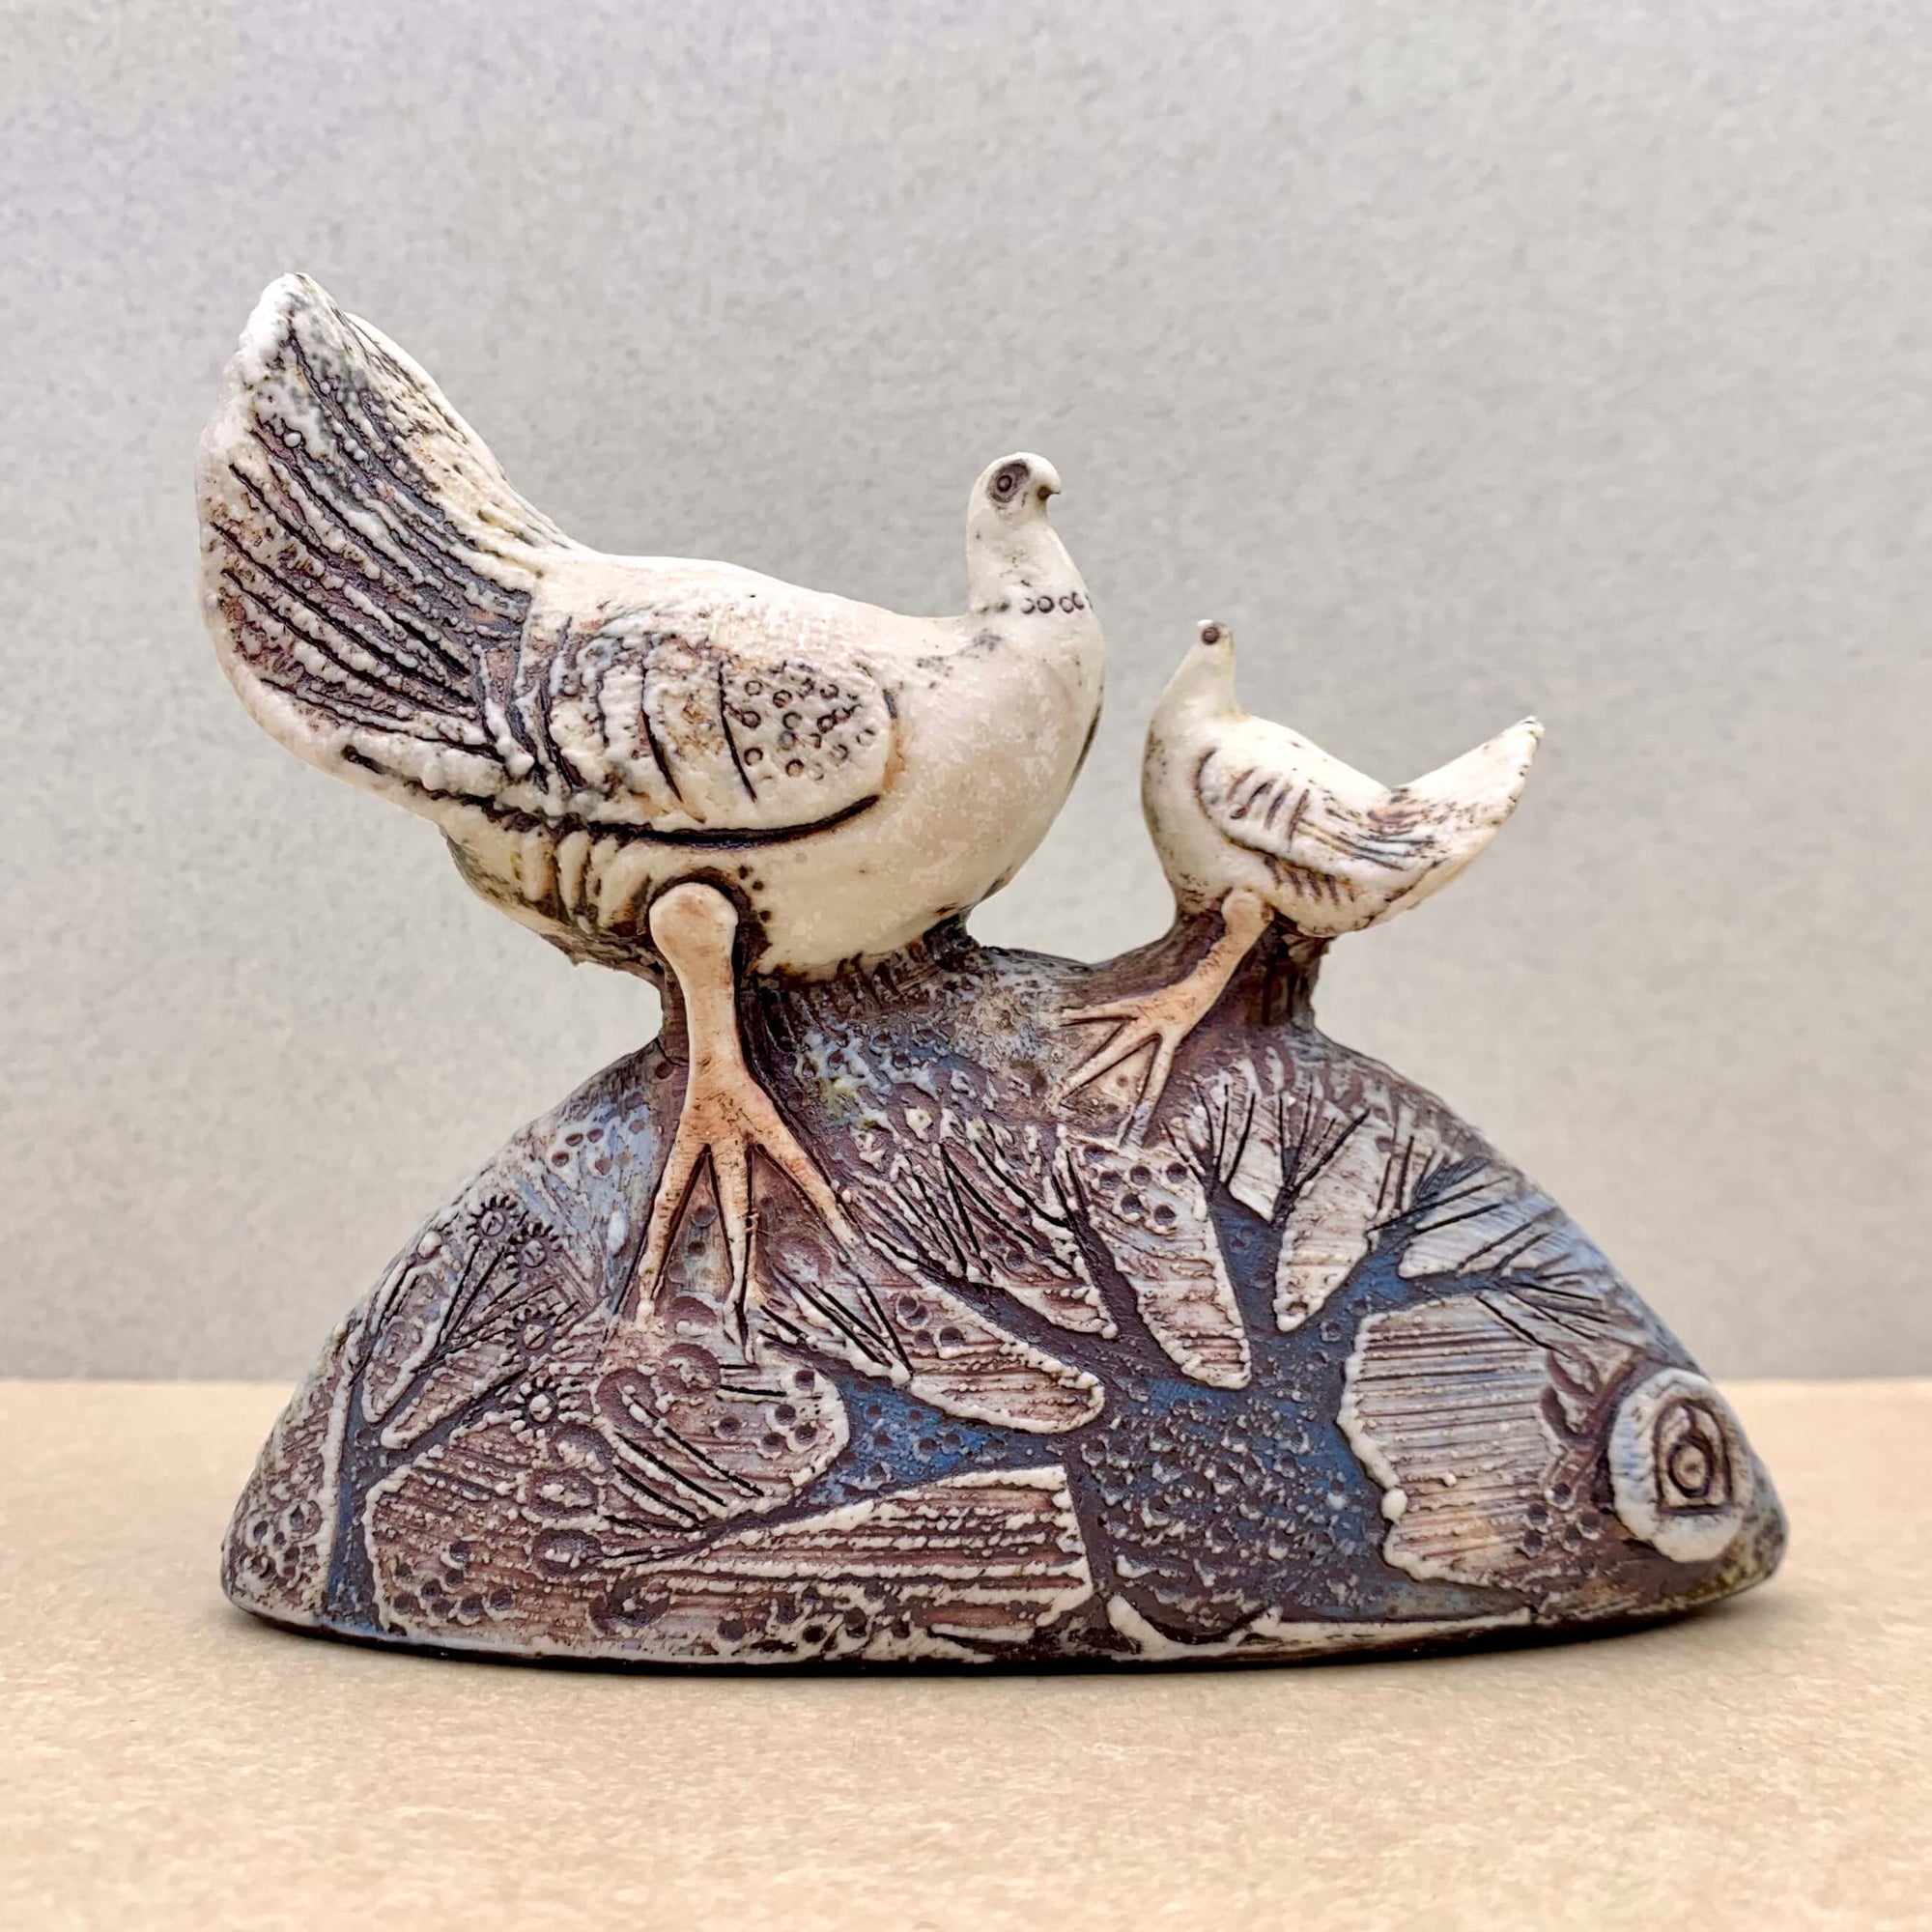 Blandine Anderson handcrafted porcelain sculpture of two doves. Featuring subtle colour contrasts of teal blue, burgundy and porcelain combined with a rich texture on the base and dove wings. Available at Ferrers Gallery.